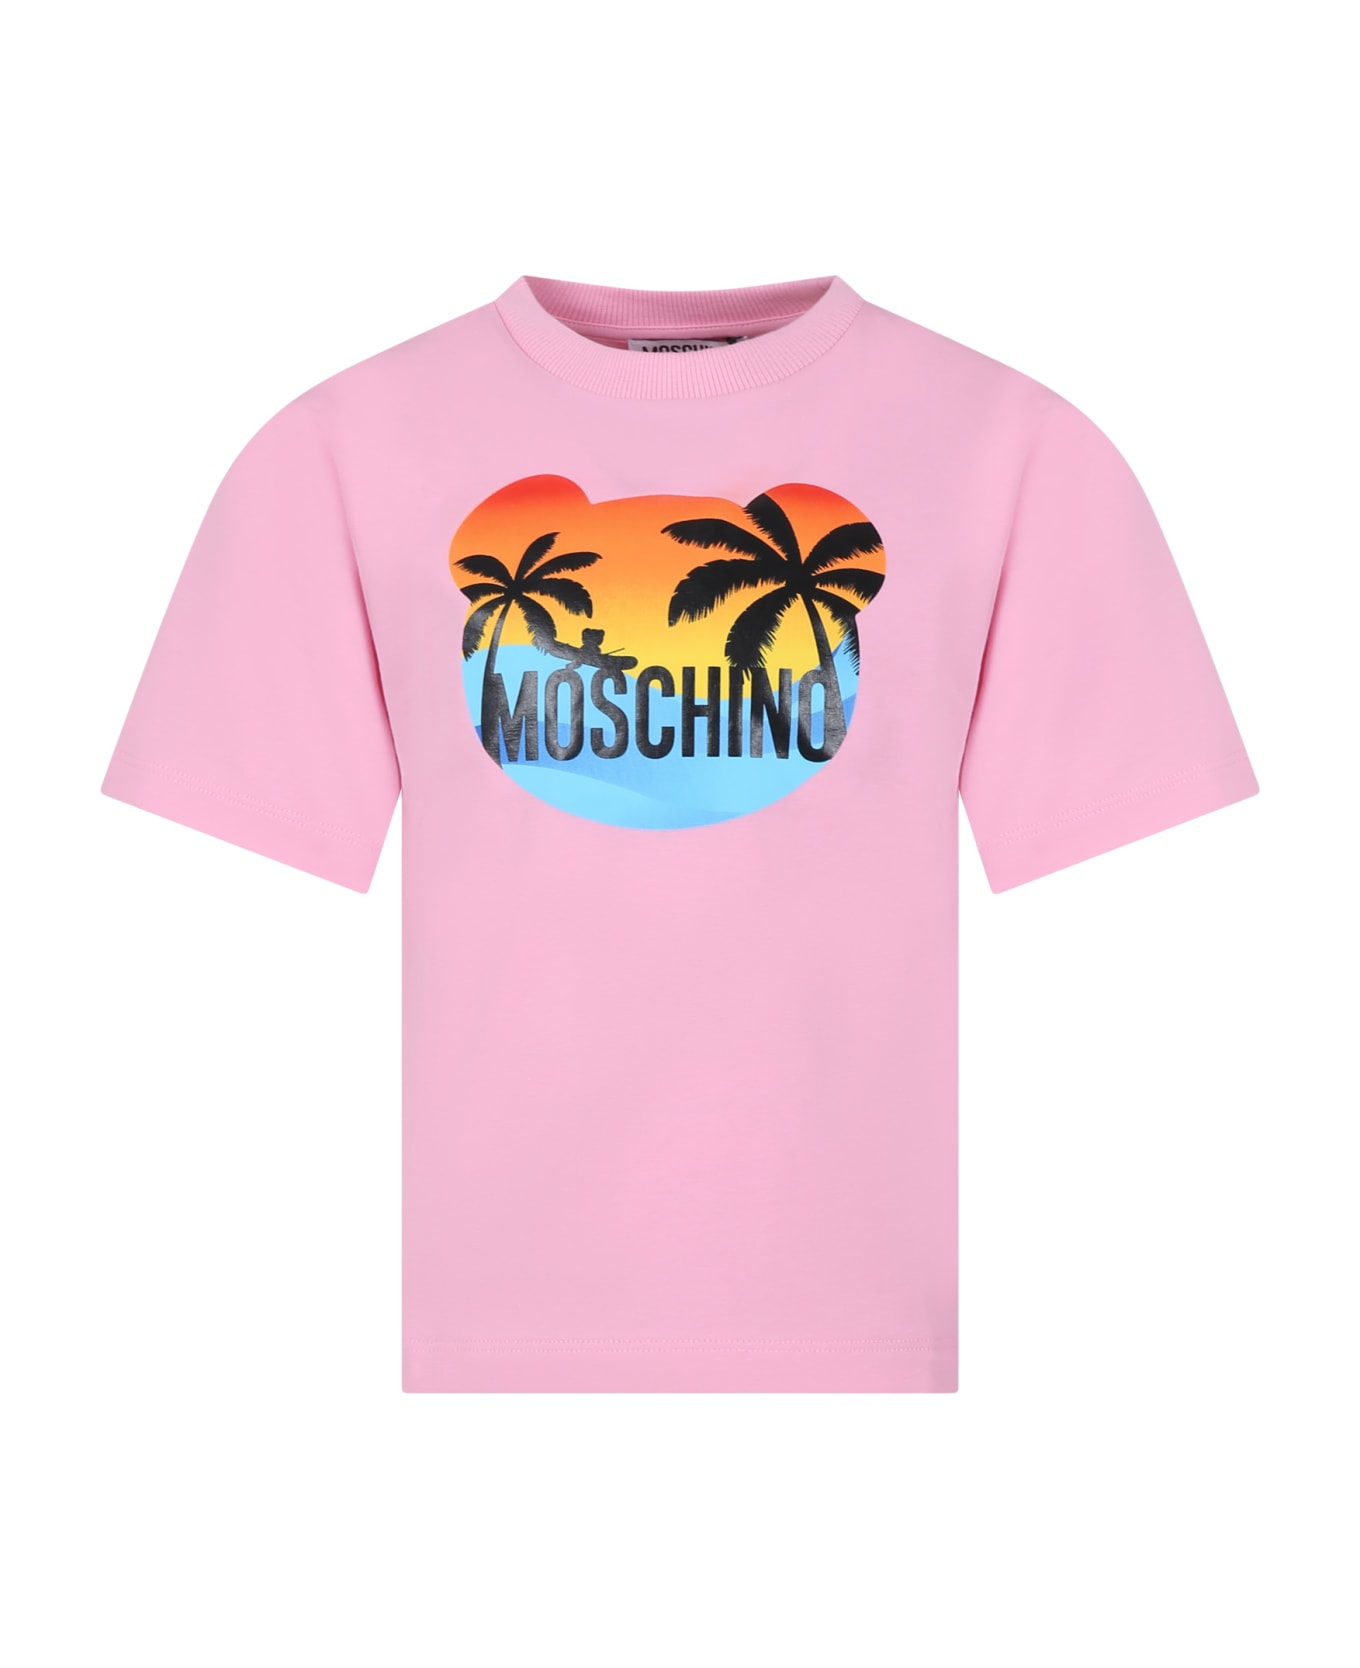 Moschino Pink T-shirt For Kids With Multicolor Print And Logo - Pink